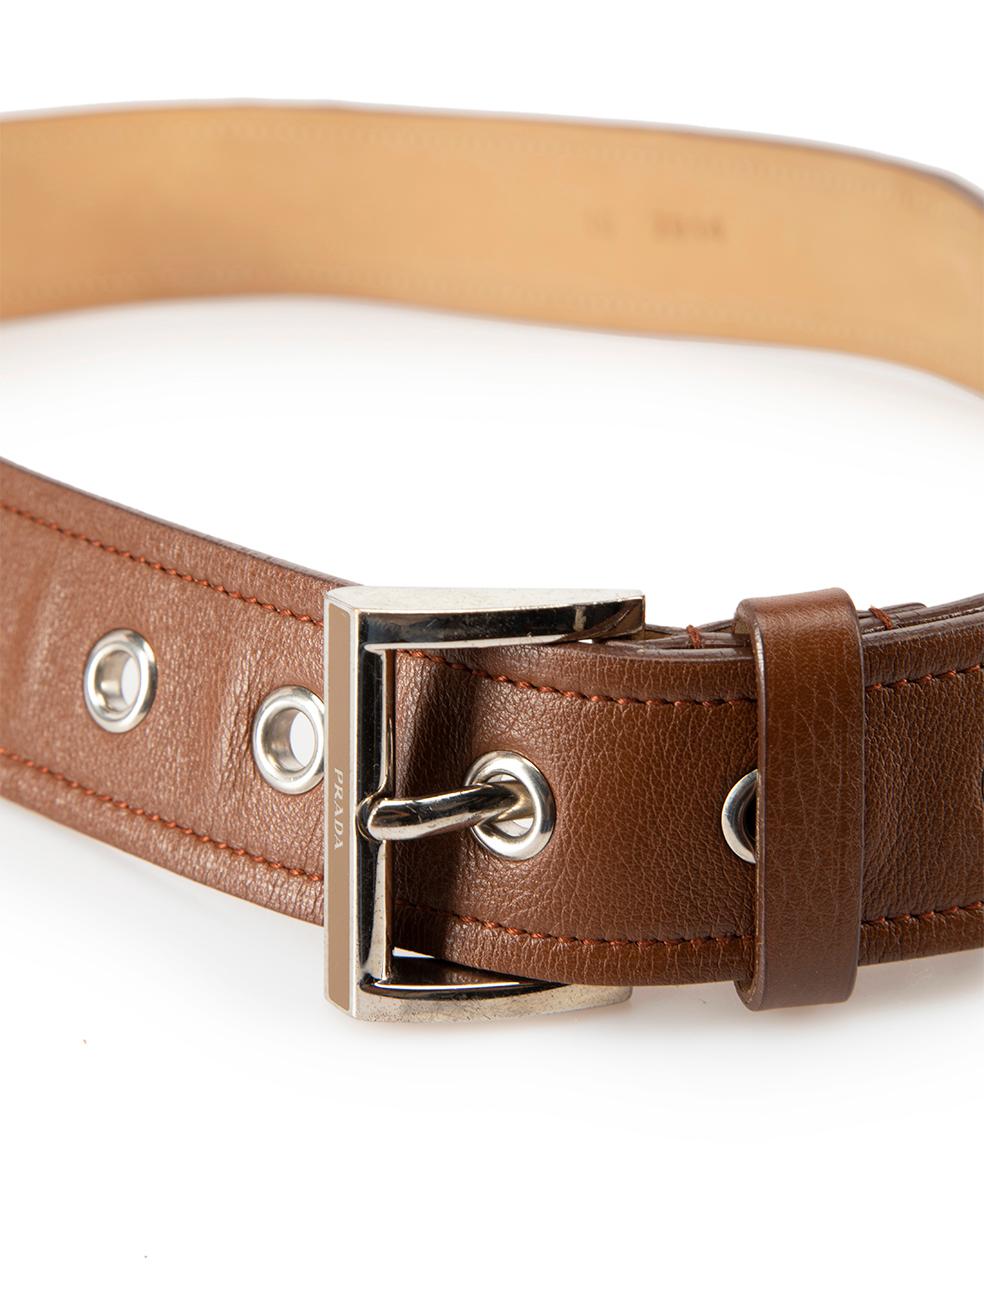 Prada Brown Leather Wide Belt In Good Condition For Sale In London, GB